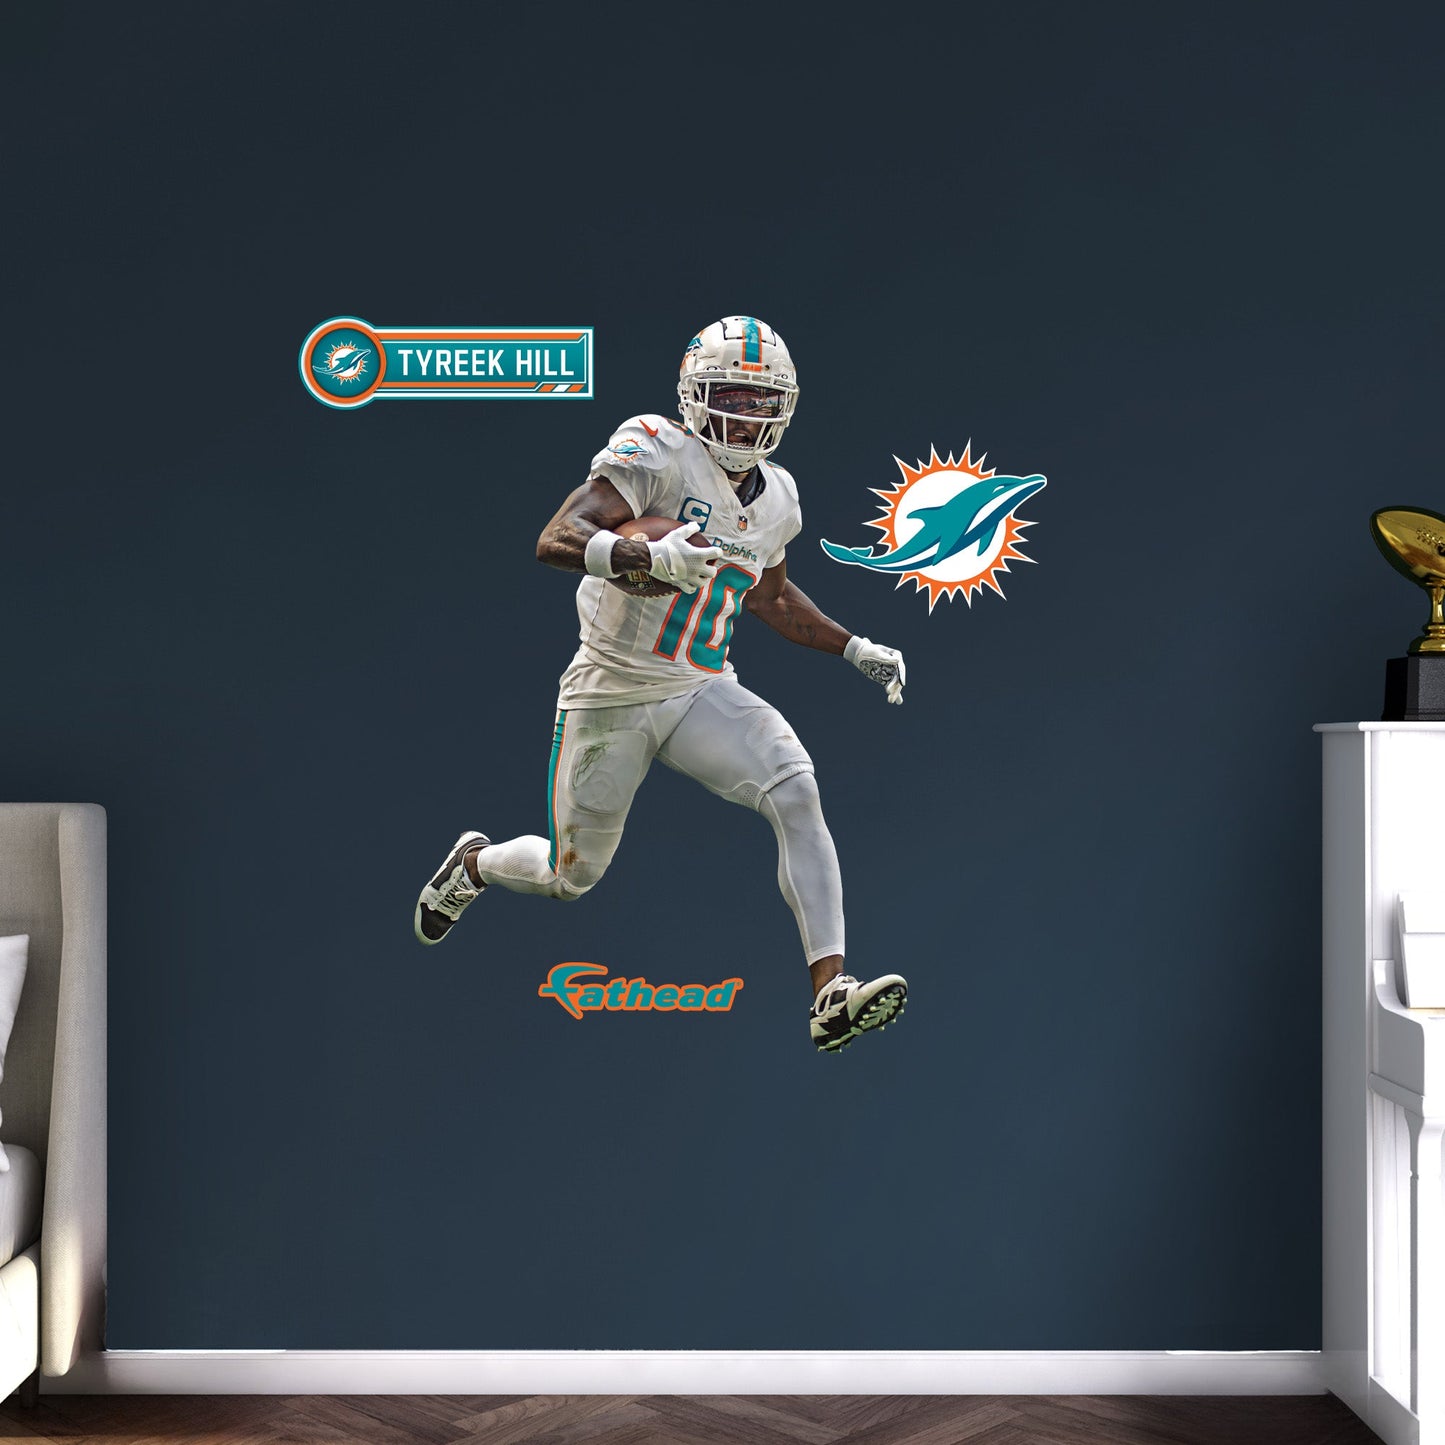 Miami Dolphins: Tyreek Hill         - Officially Licensed NFL Removable     Adhesive Decal